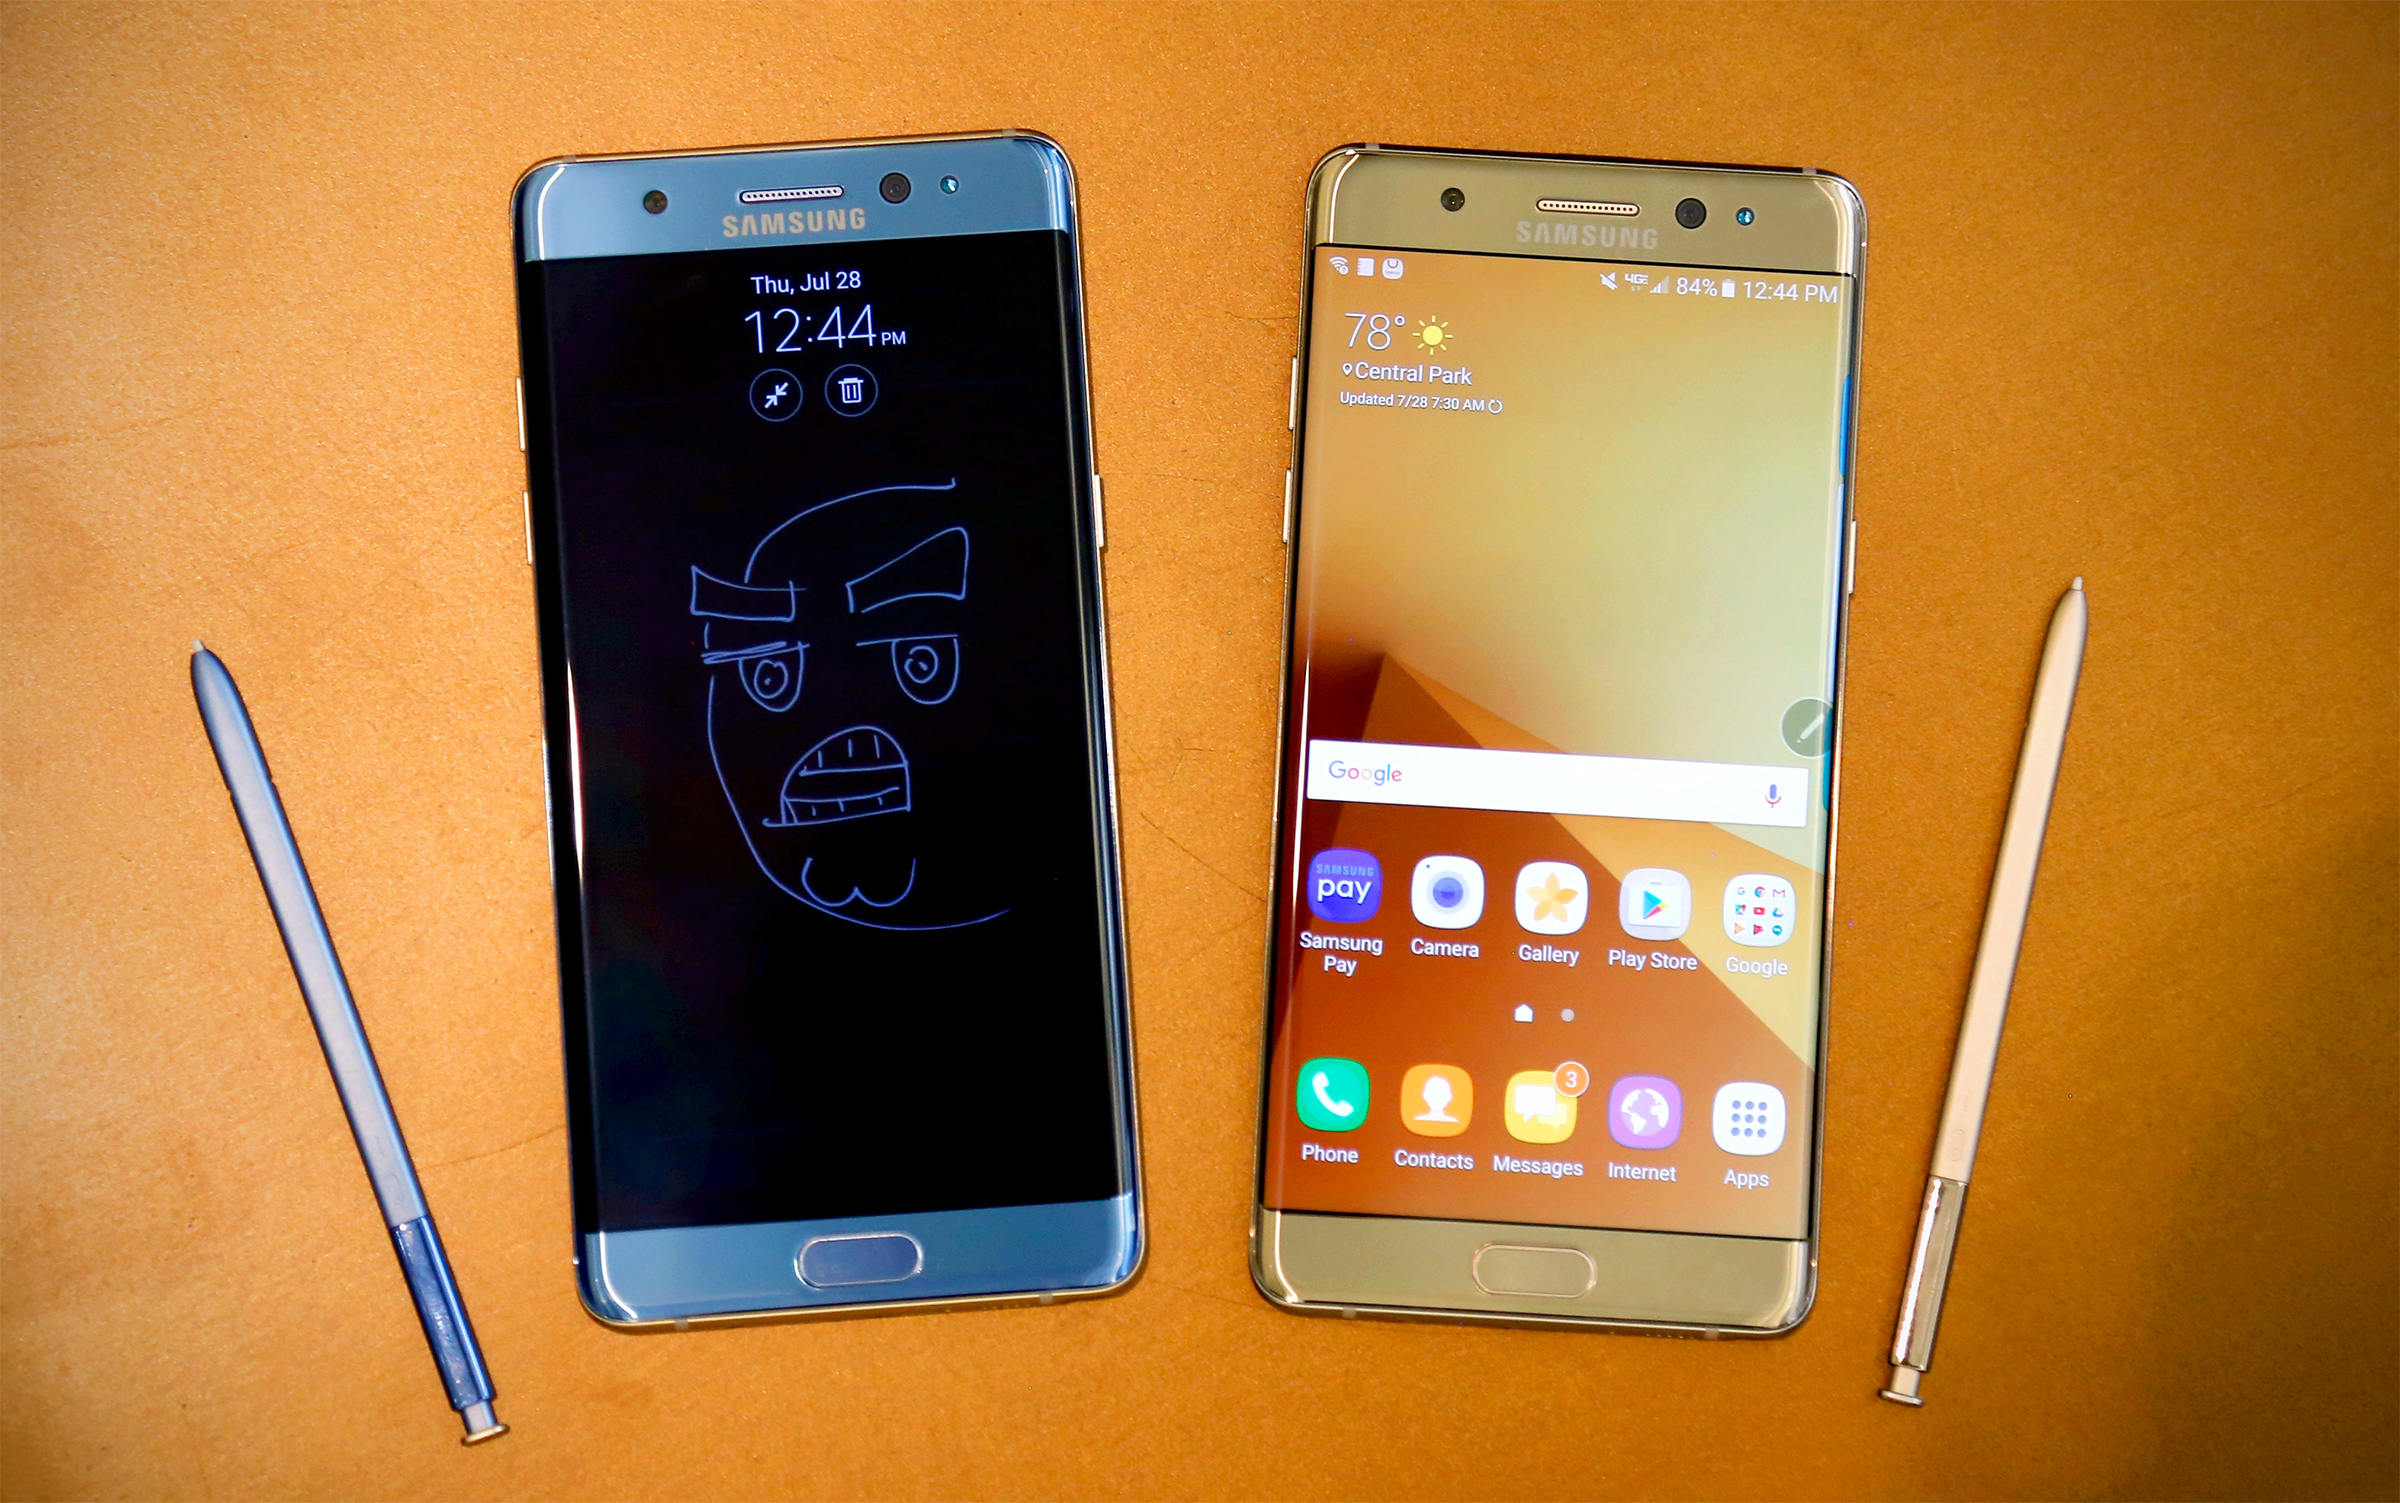 Samsung Galaxy Note7 images